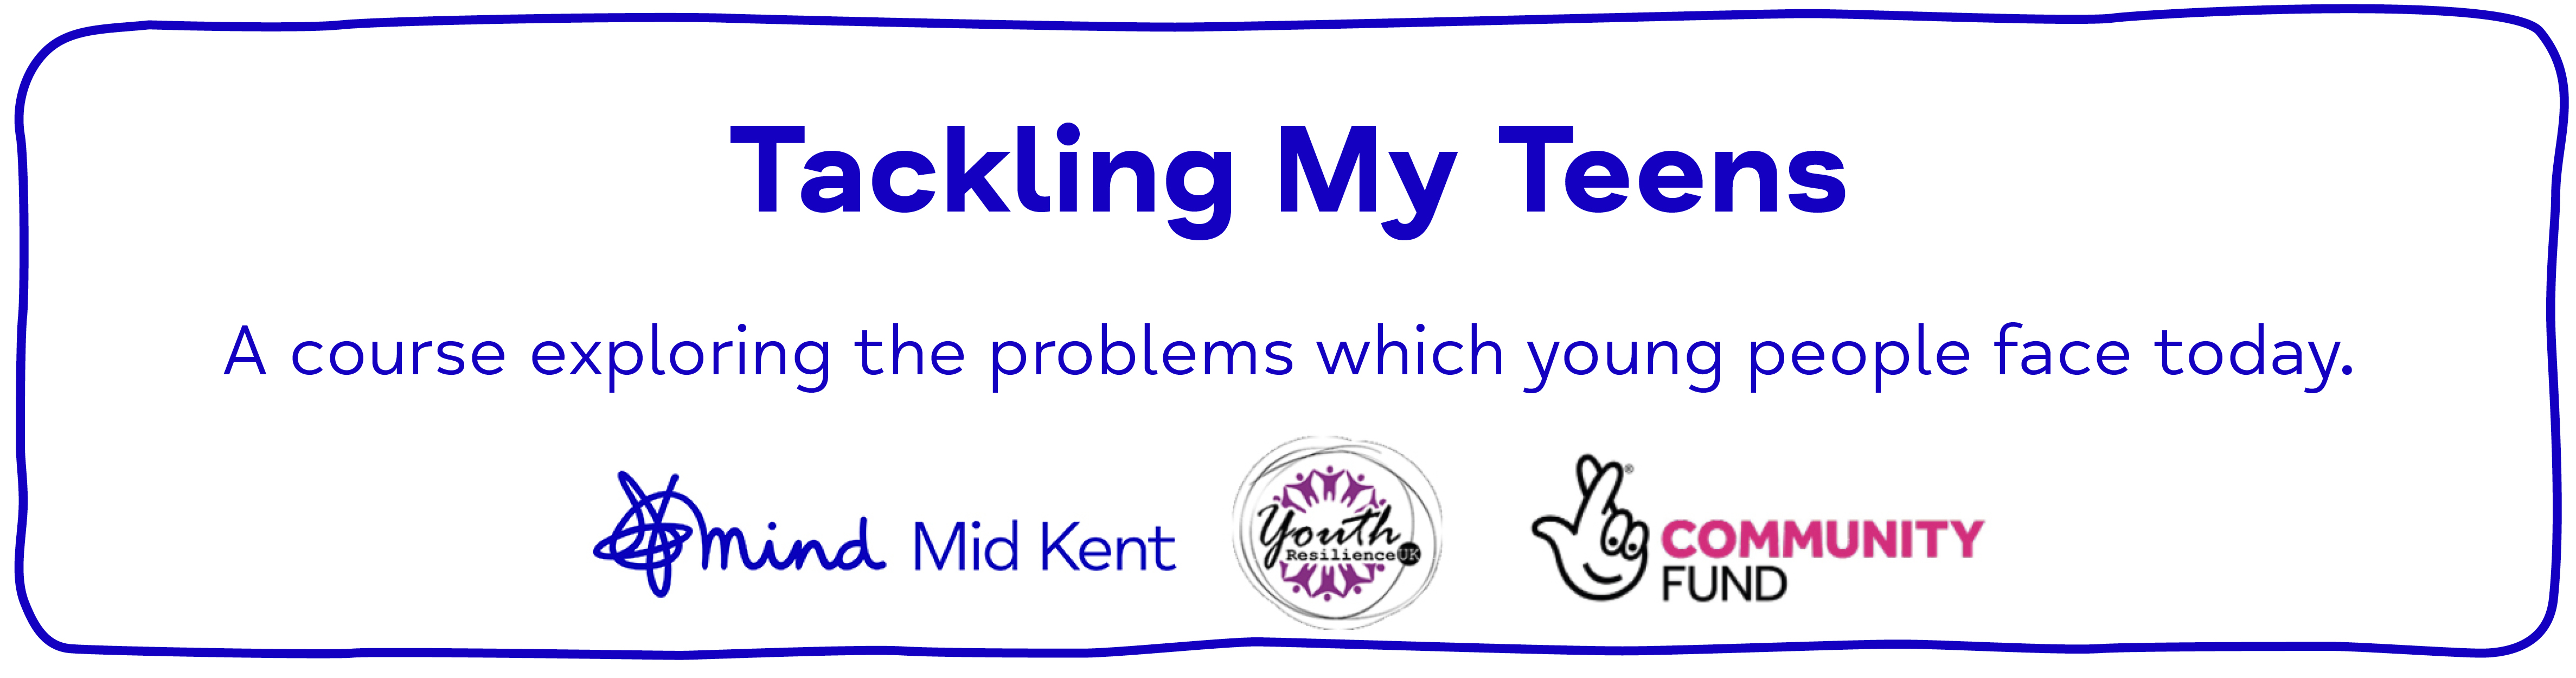 Tackling My Teens A course exploring the problems which young people face today.